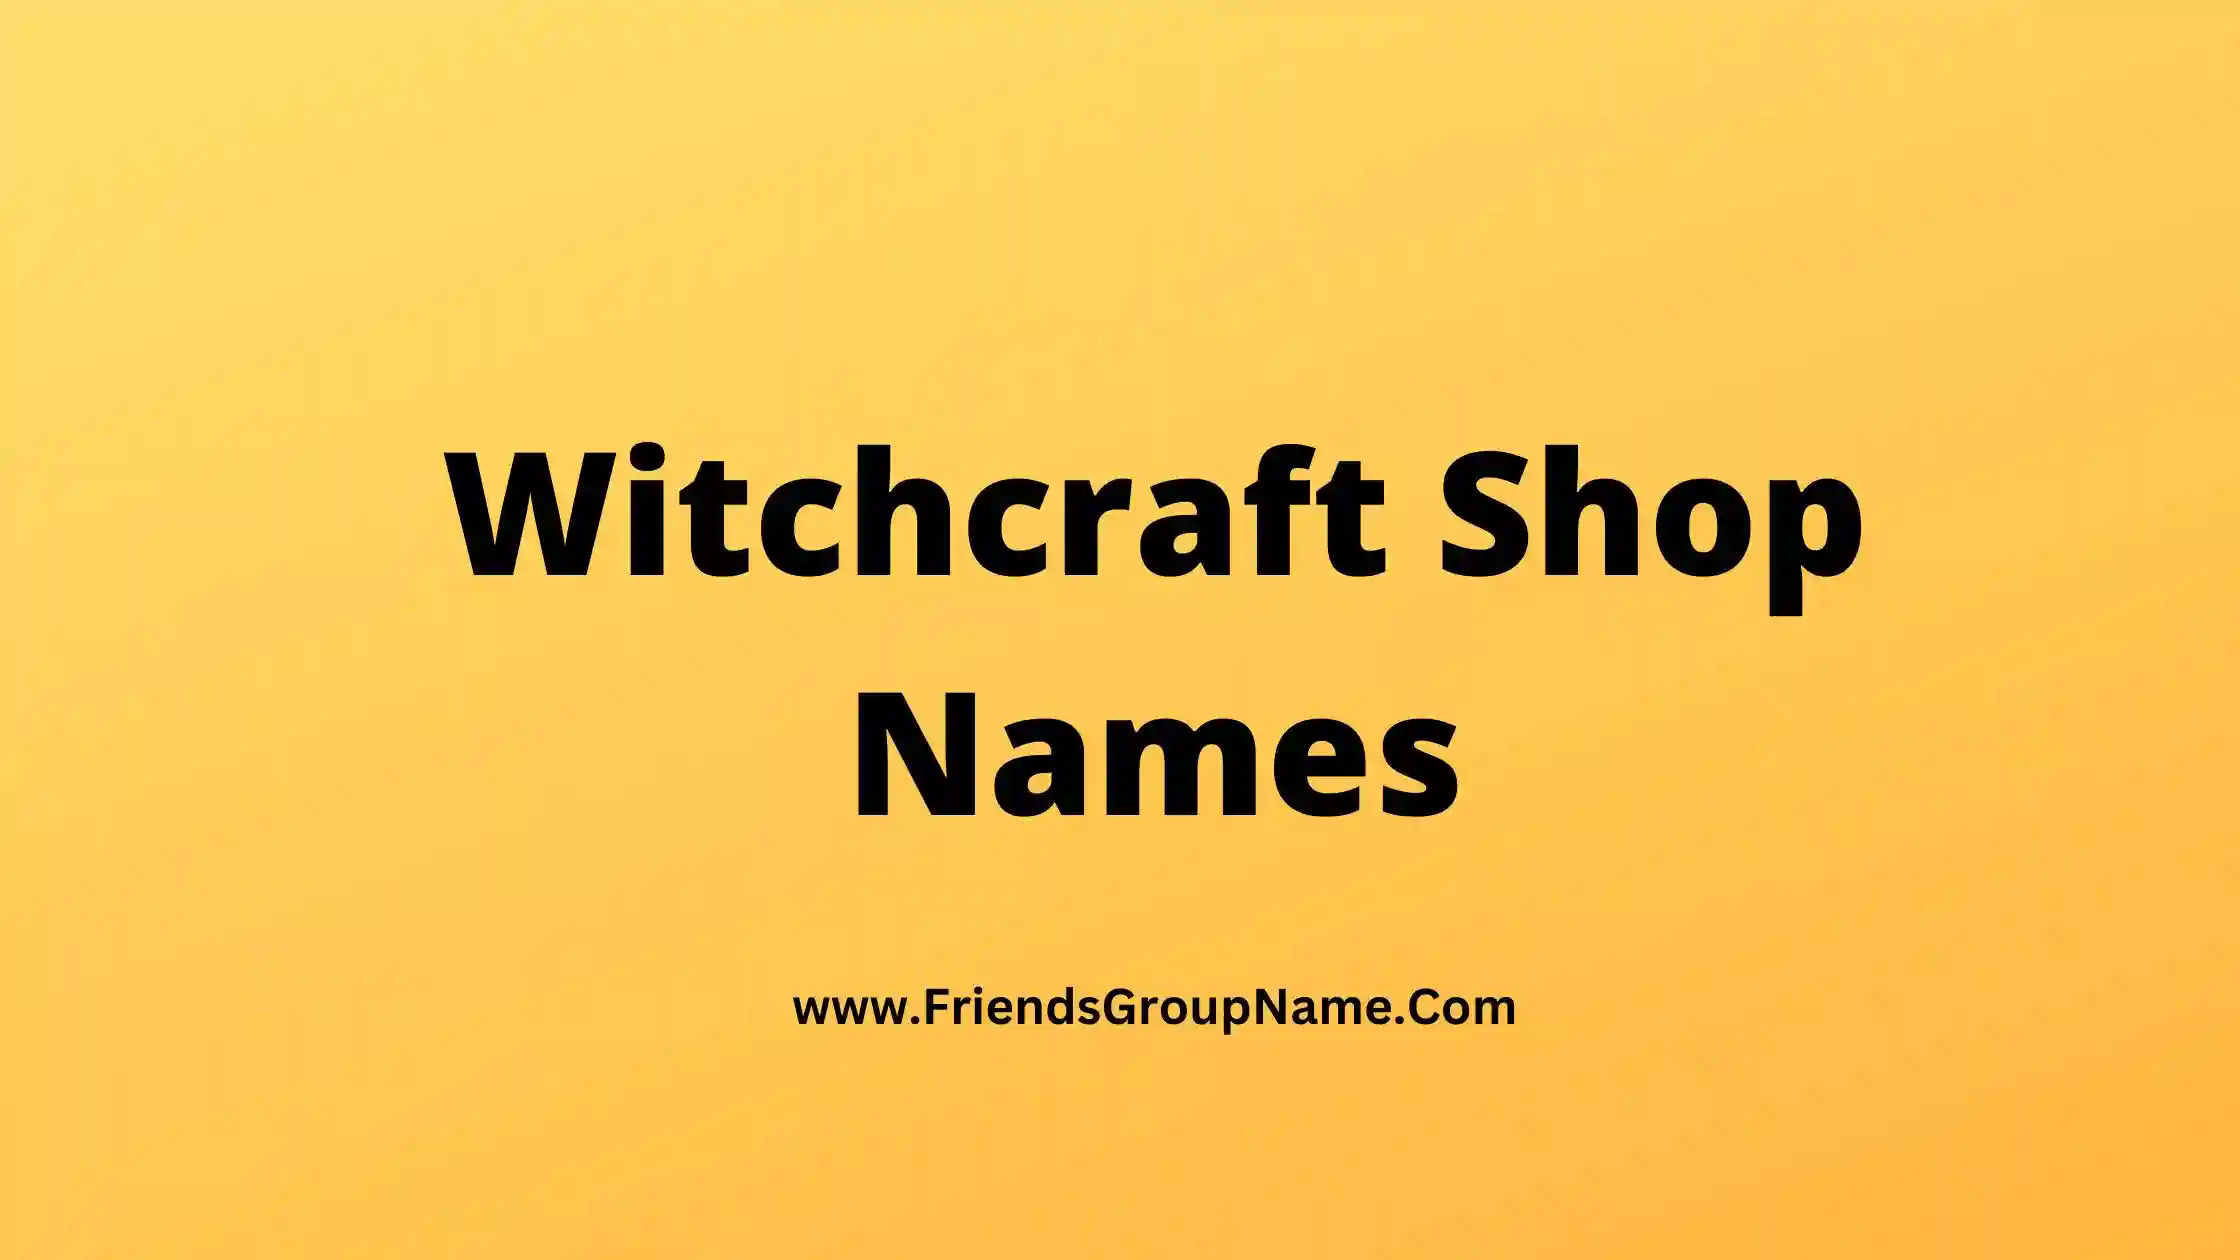 Witchcraft Shop Names